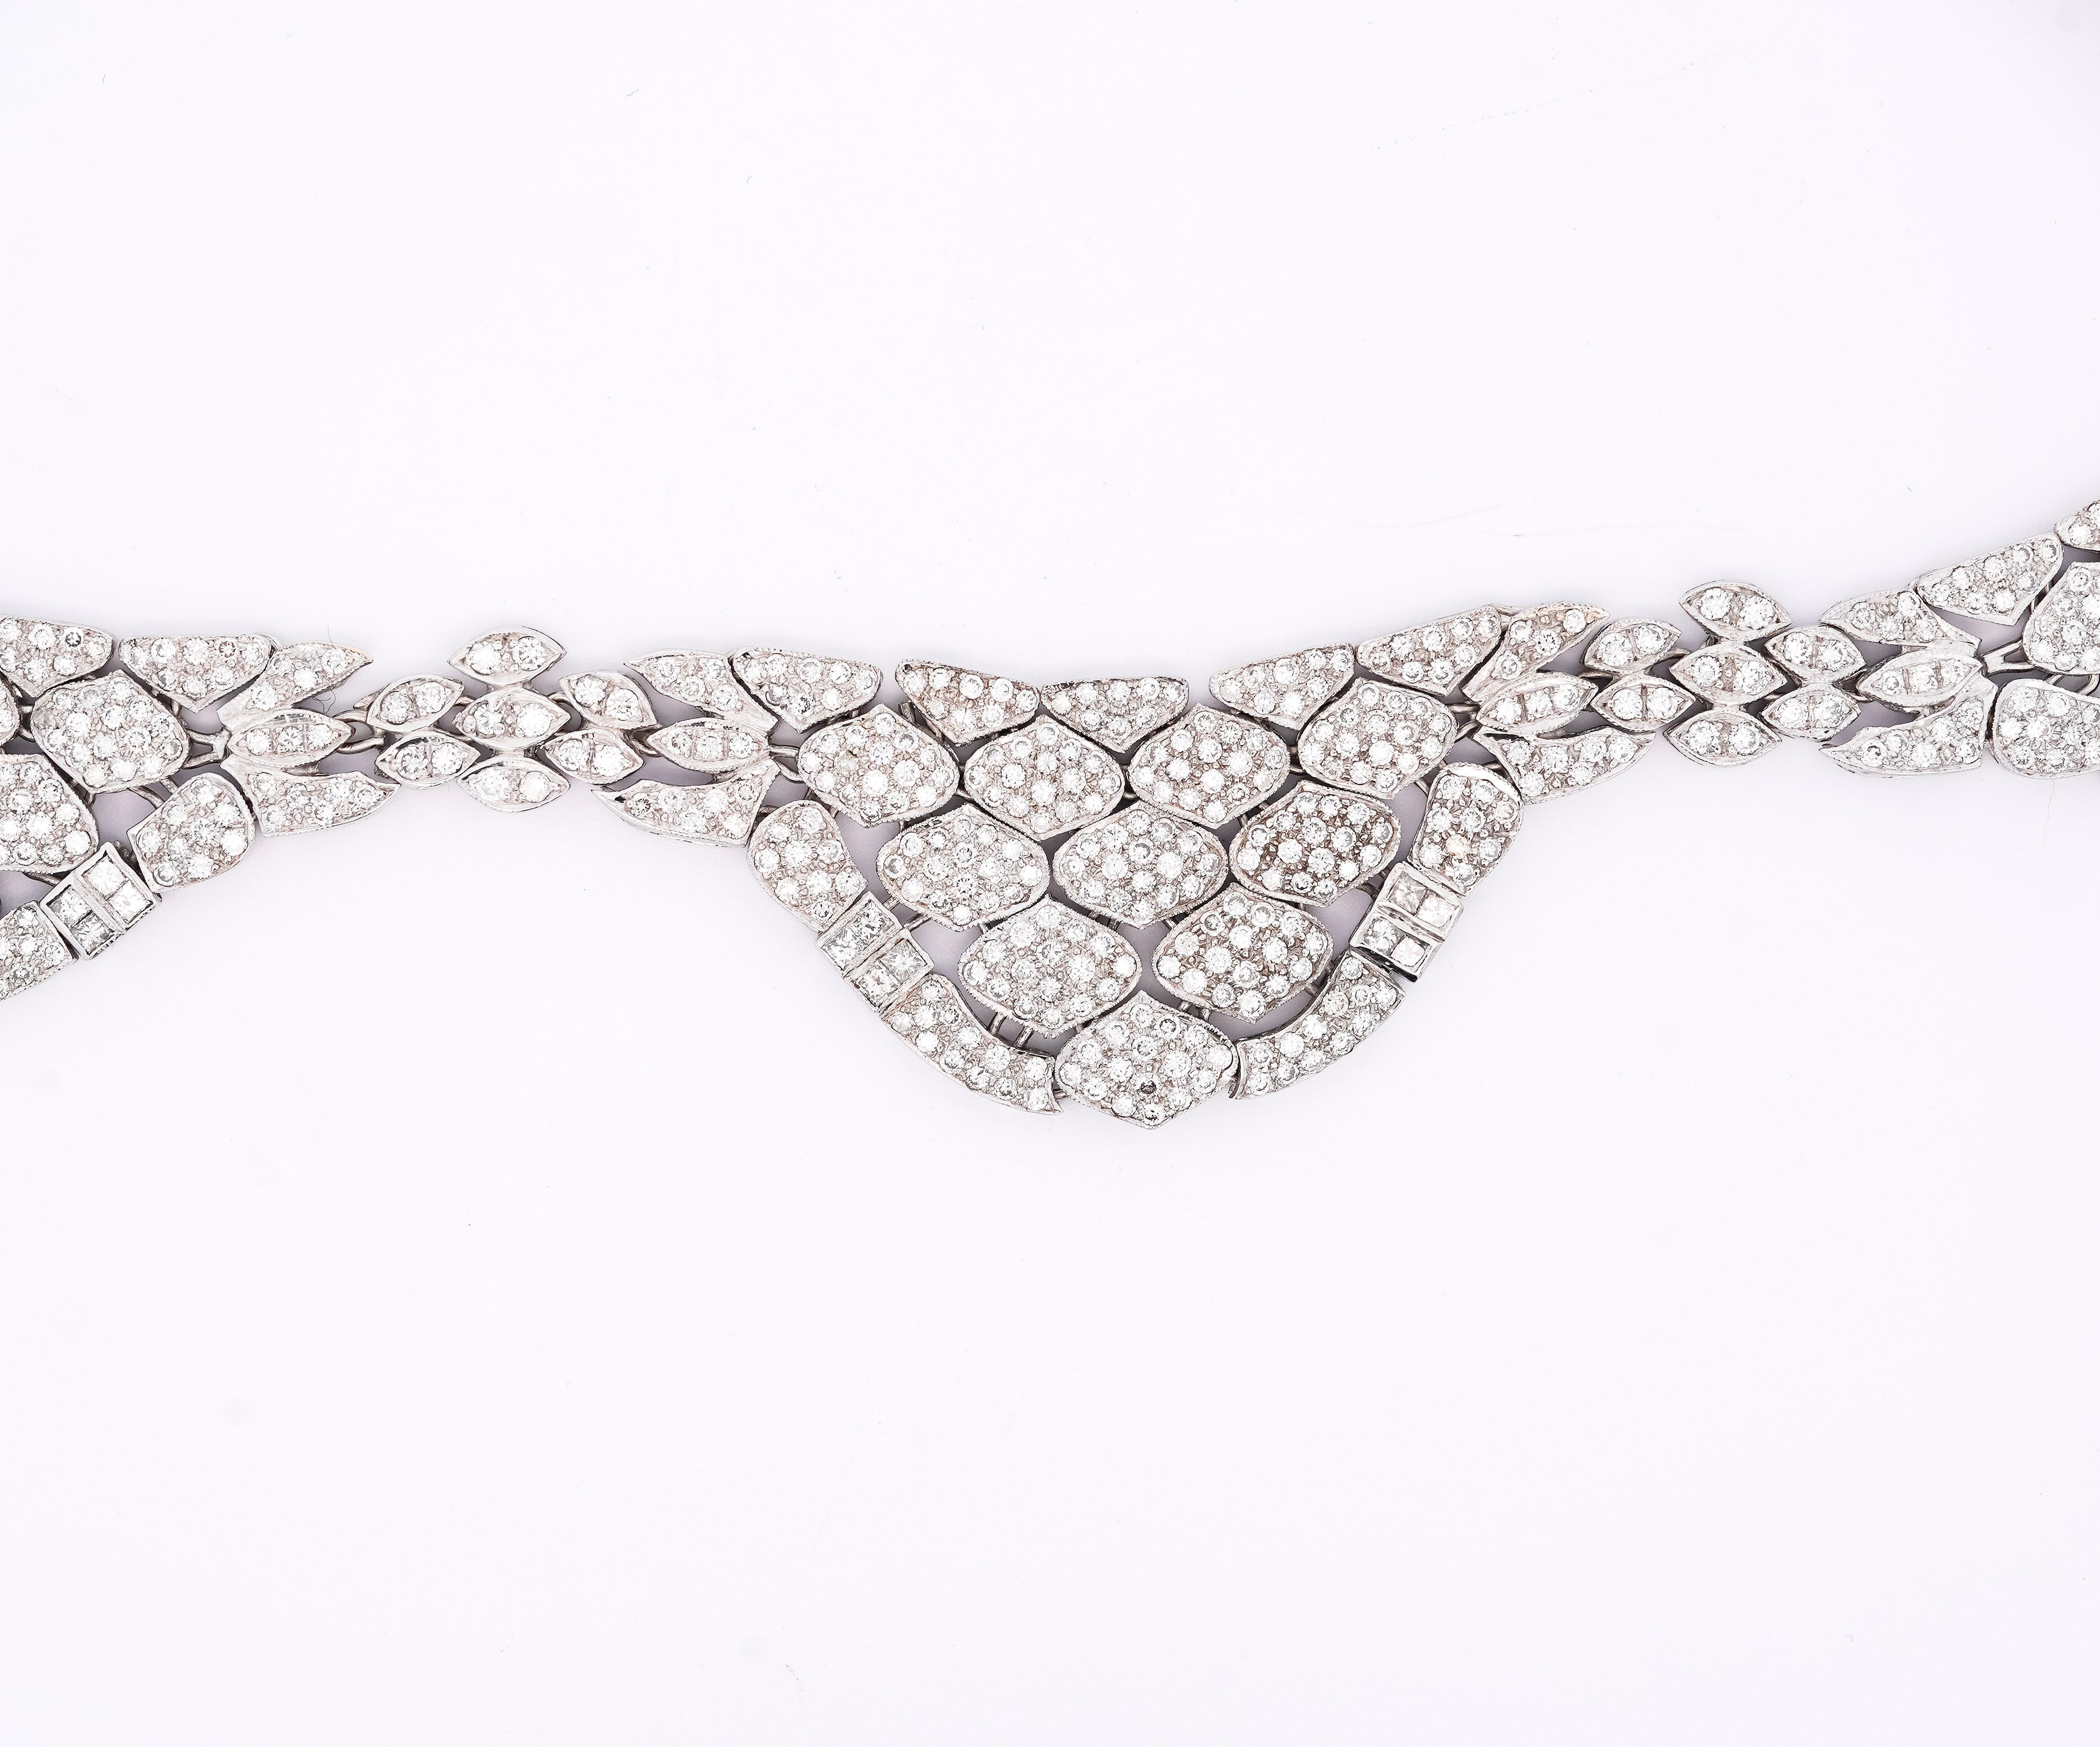 Vintage 17.6 Carat Round-Brilliant Cut Diamond Choker Necklace. This diamond choker is crafted from 18K white gold, weighs 50.1 grams, is in a bezel setting, and is 15 inches in length. The diamond color ranges from G-H with VS-SI clarity. The